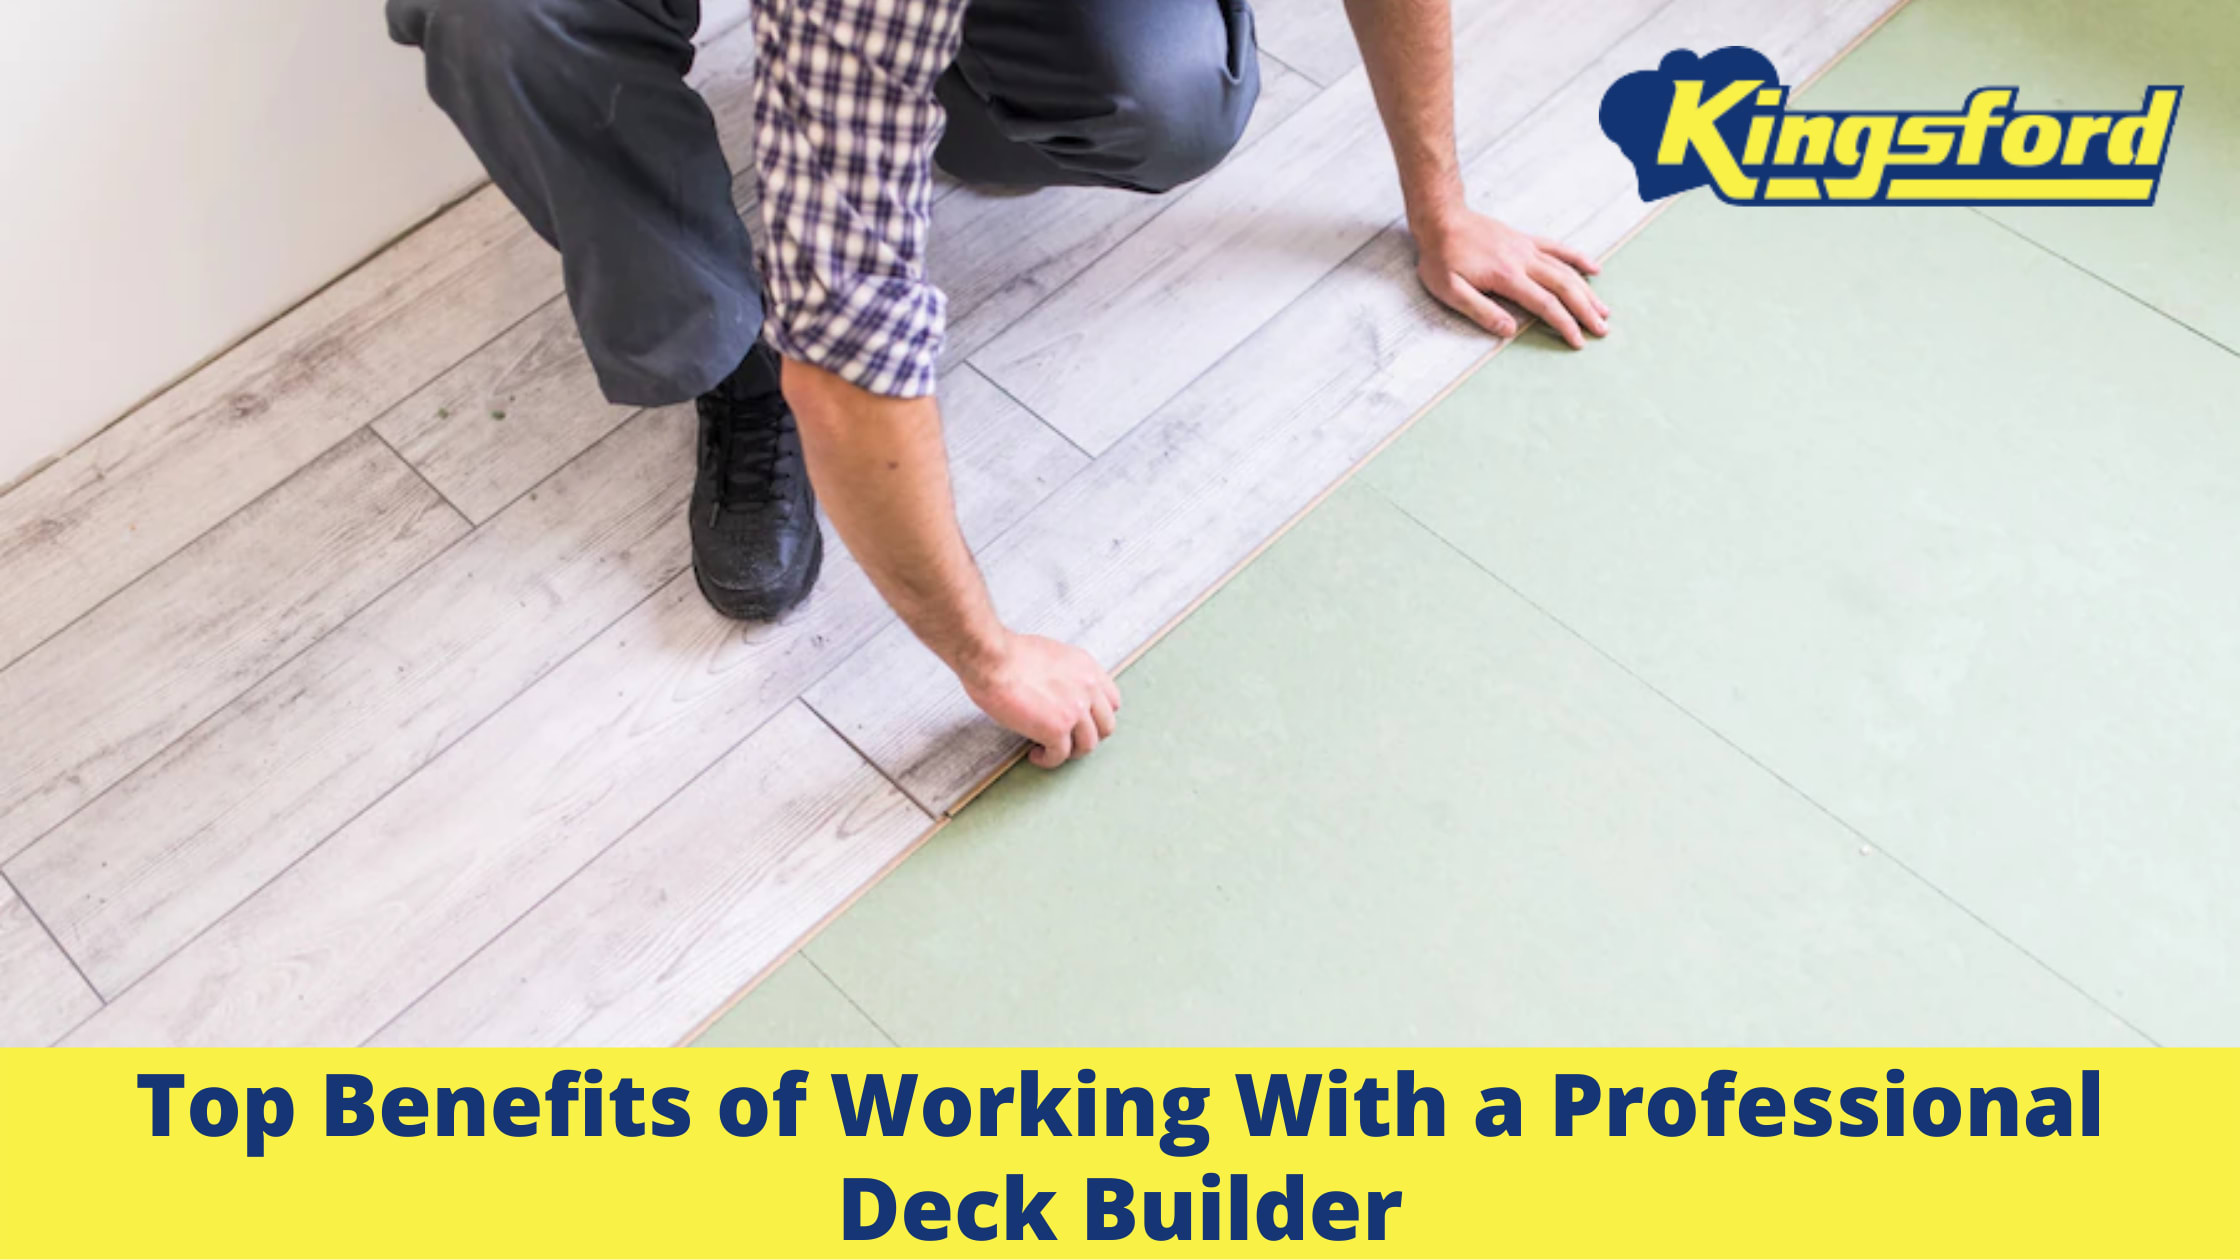 Top Benefits of Working With a Professional Deck Builder | Lifehack